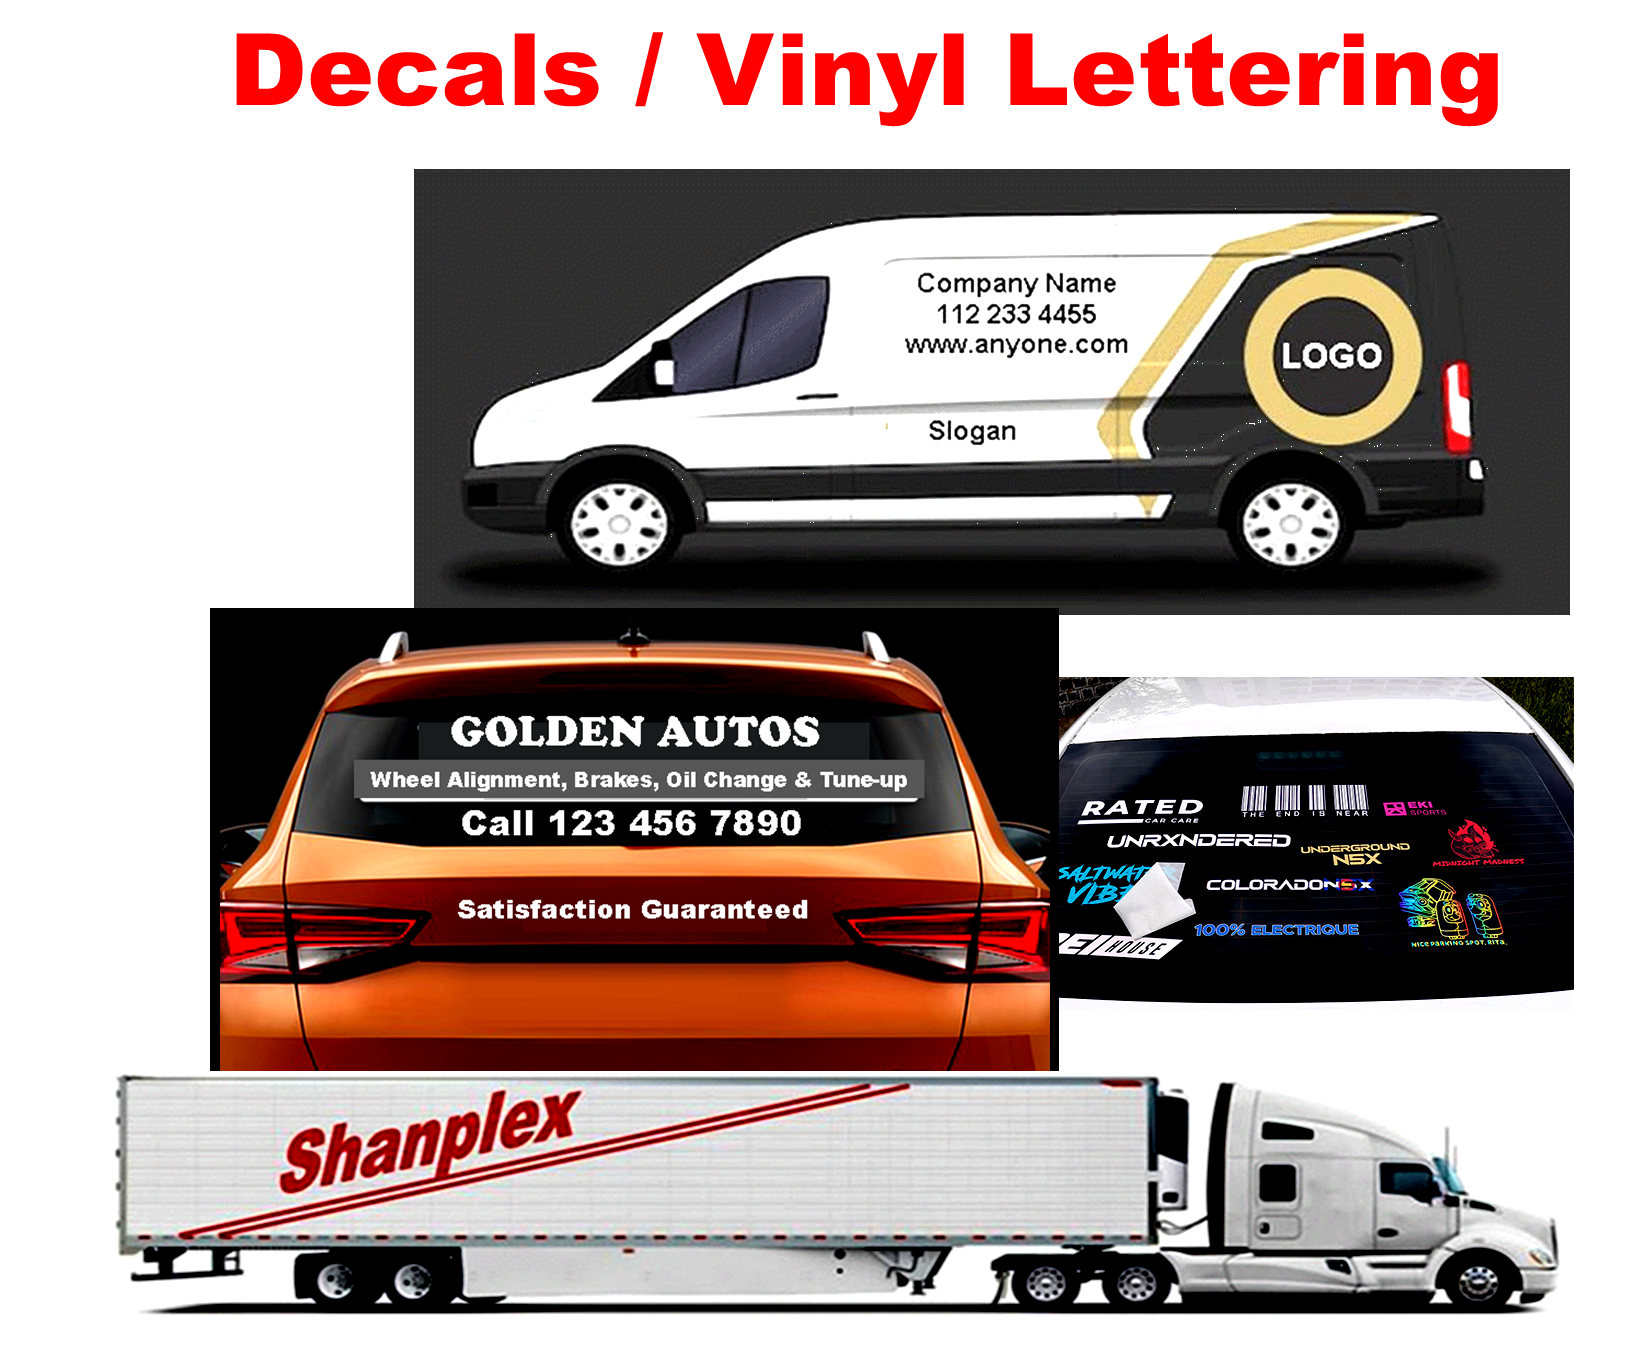 Decaals and vinyl lettering for car windows and rear windshields